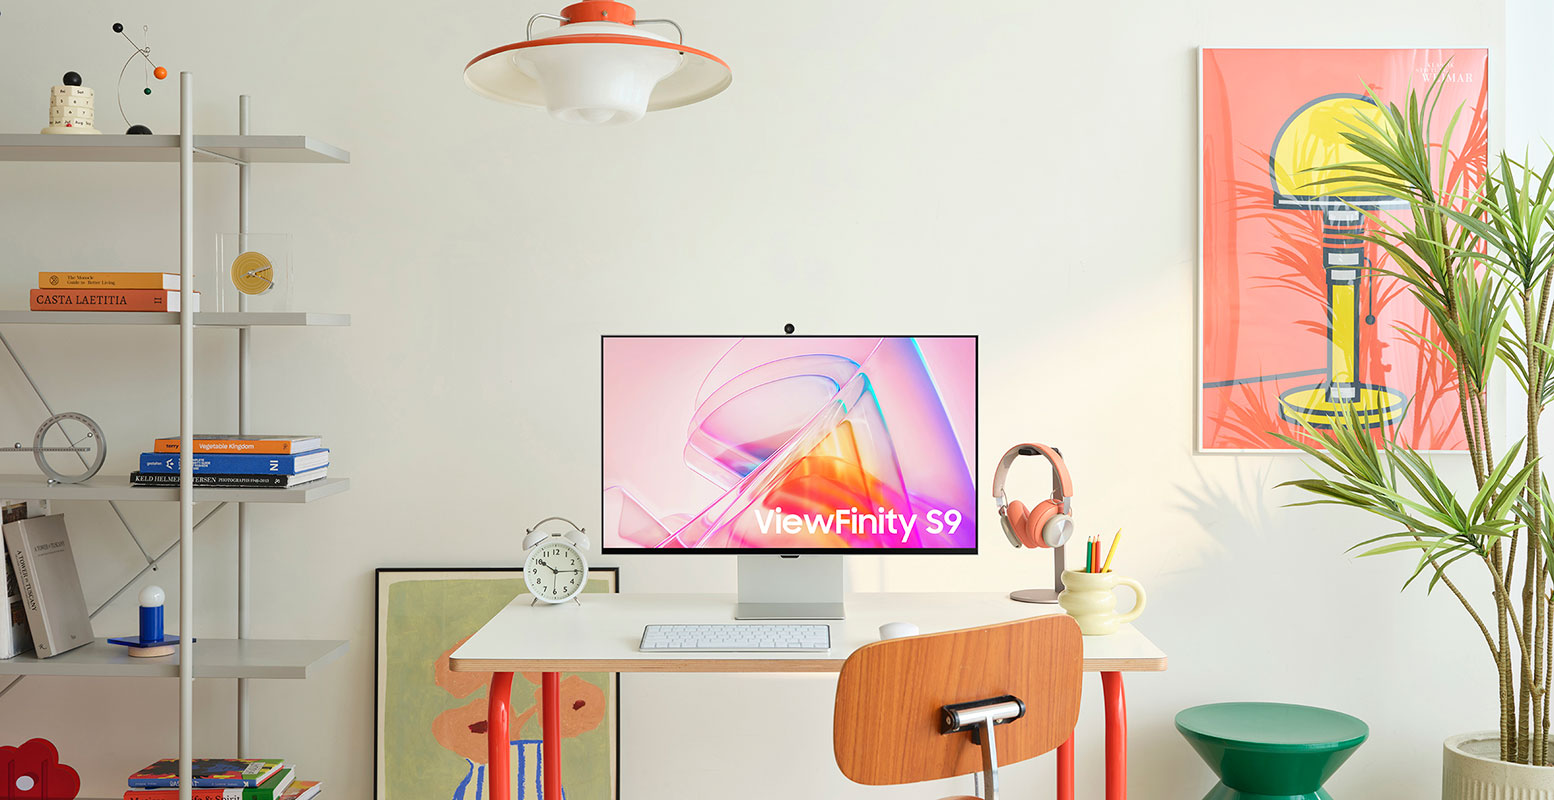 Samsung 27-inch 5K Monitor Infinity S9 on the Table